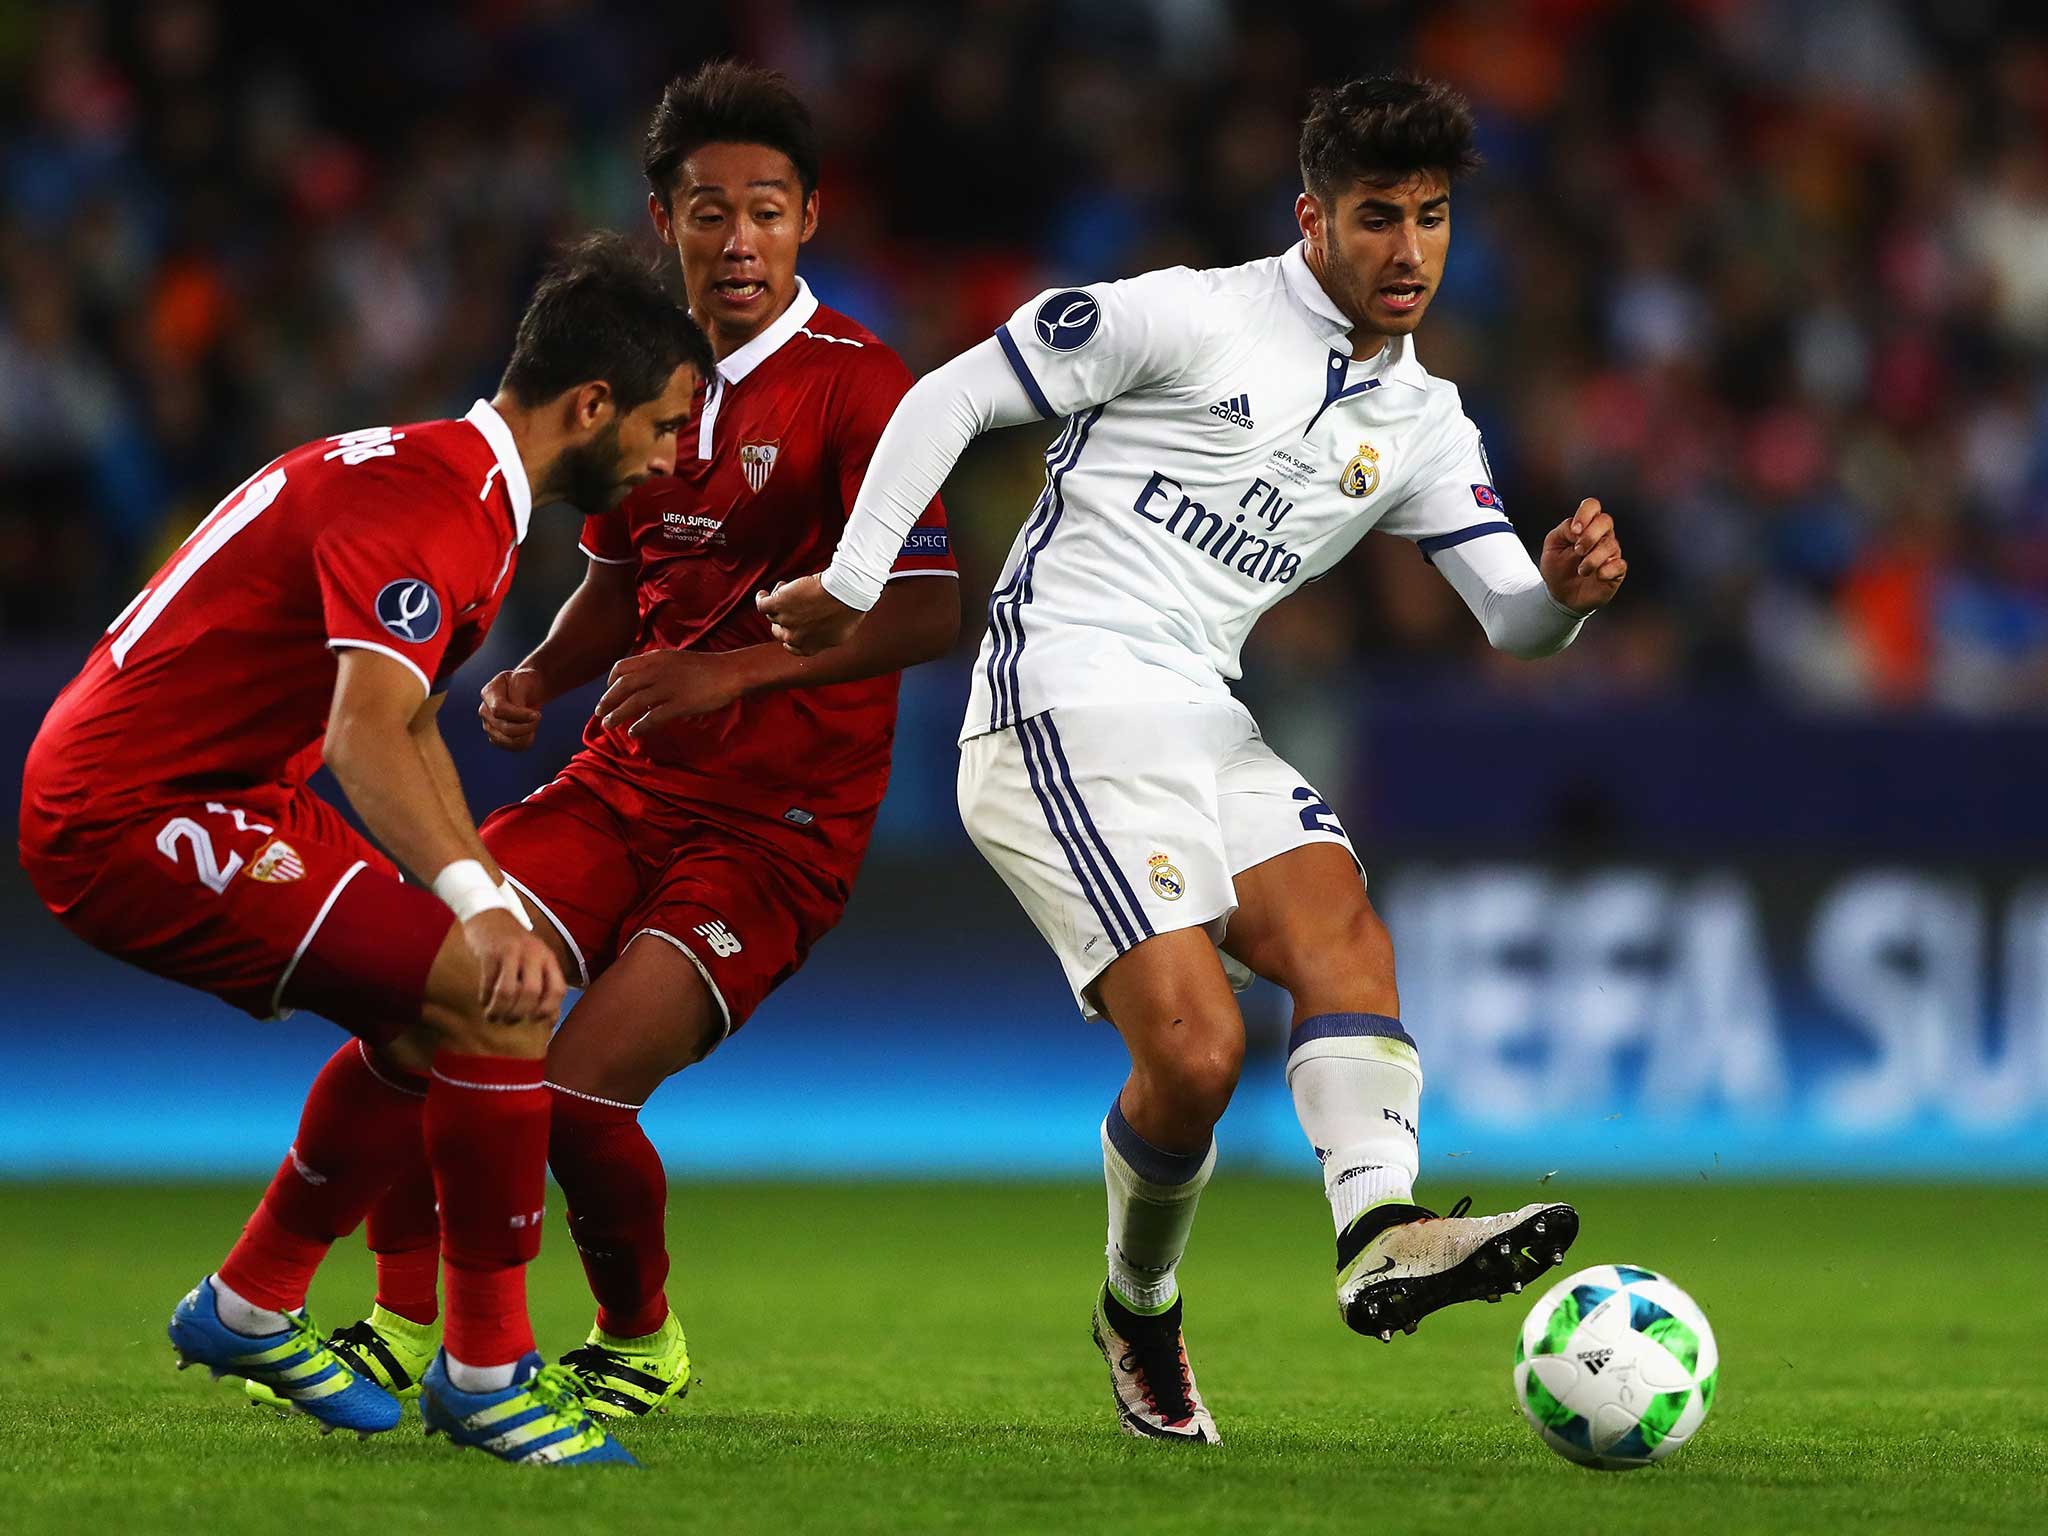 Real Madrid have high hopes for new signing Marco Asensio